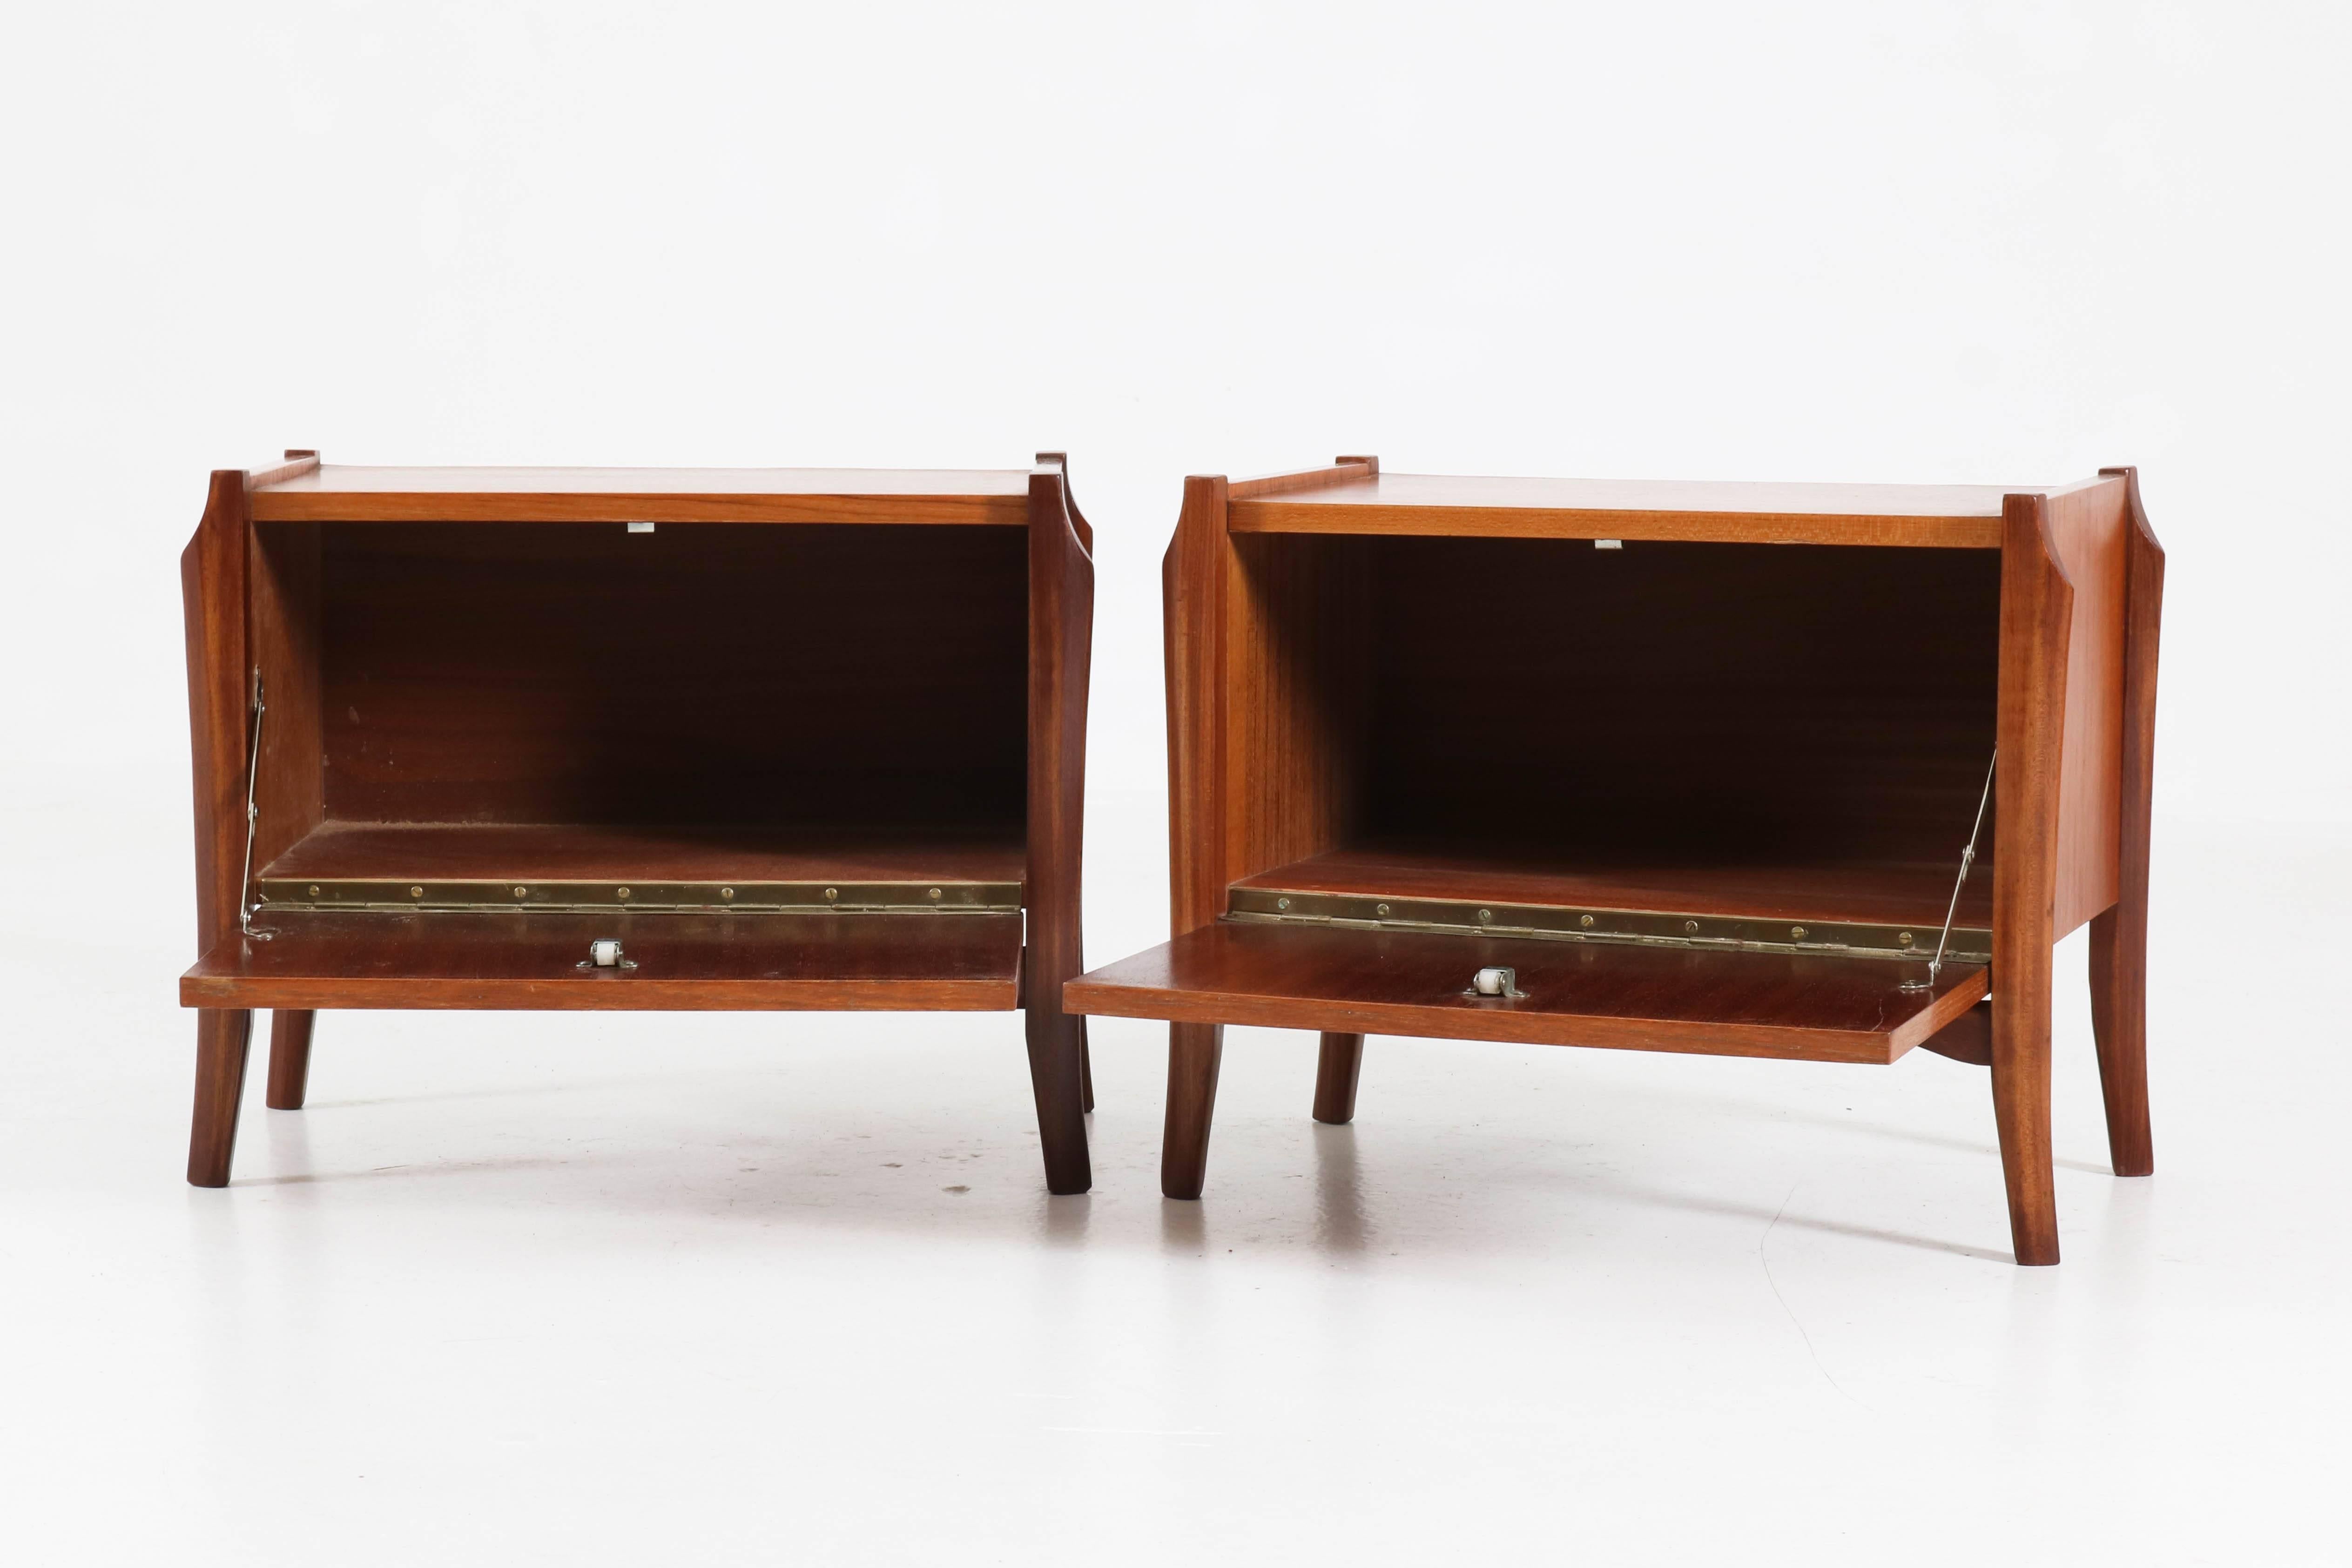 Elegant pair of Dutch Mid-Century Modern bedside tables or nightstands.
Solid teak with teak veneer.
Organic design from the 1960s.
In good original condition with minor wear consistent with age and use,
preserving a beautiful patina.
   